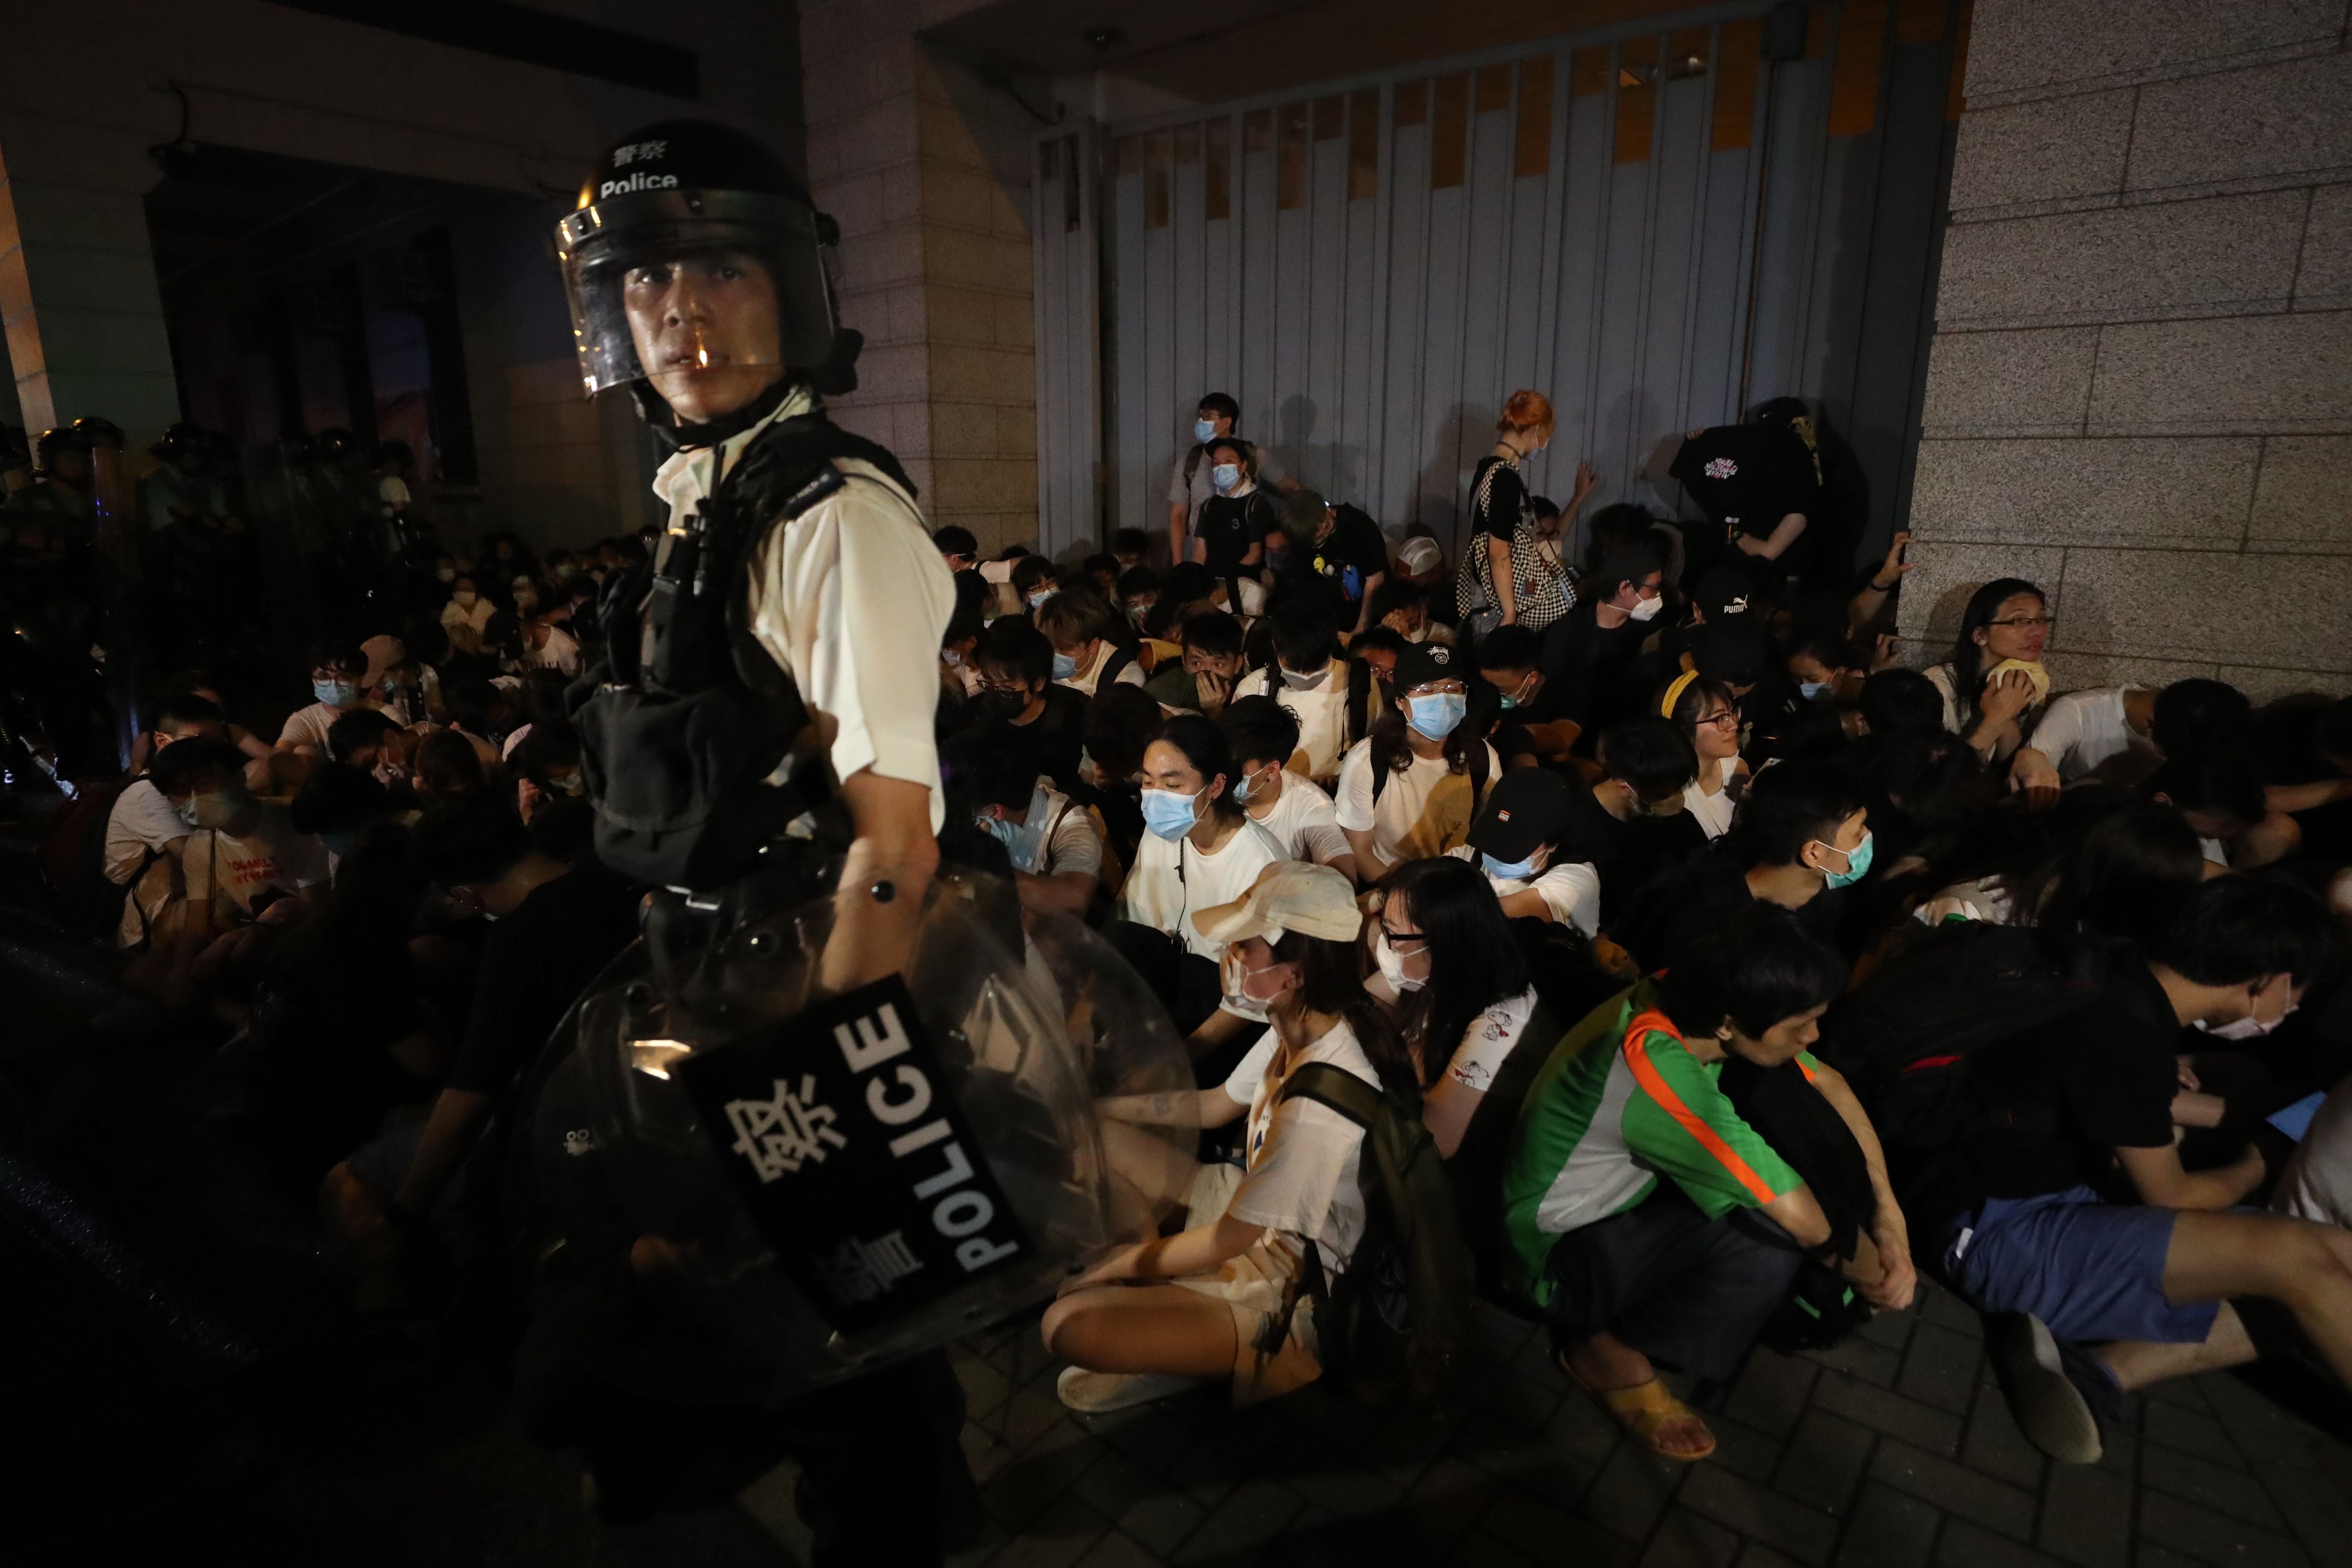 Officers have protesters corralled outside the old Wan Chai police station on Gloucester Road. Photo: Sam Tsang